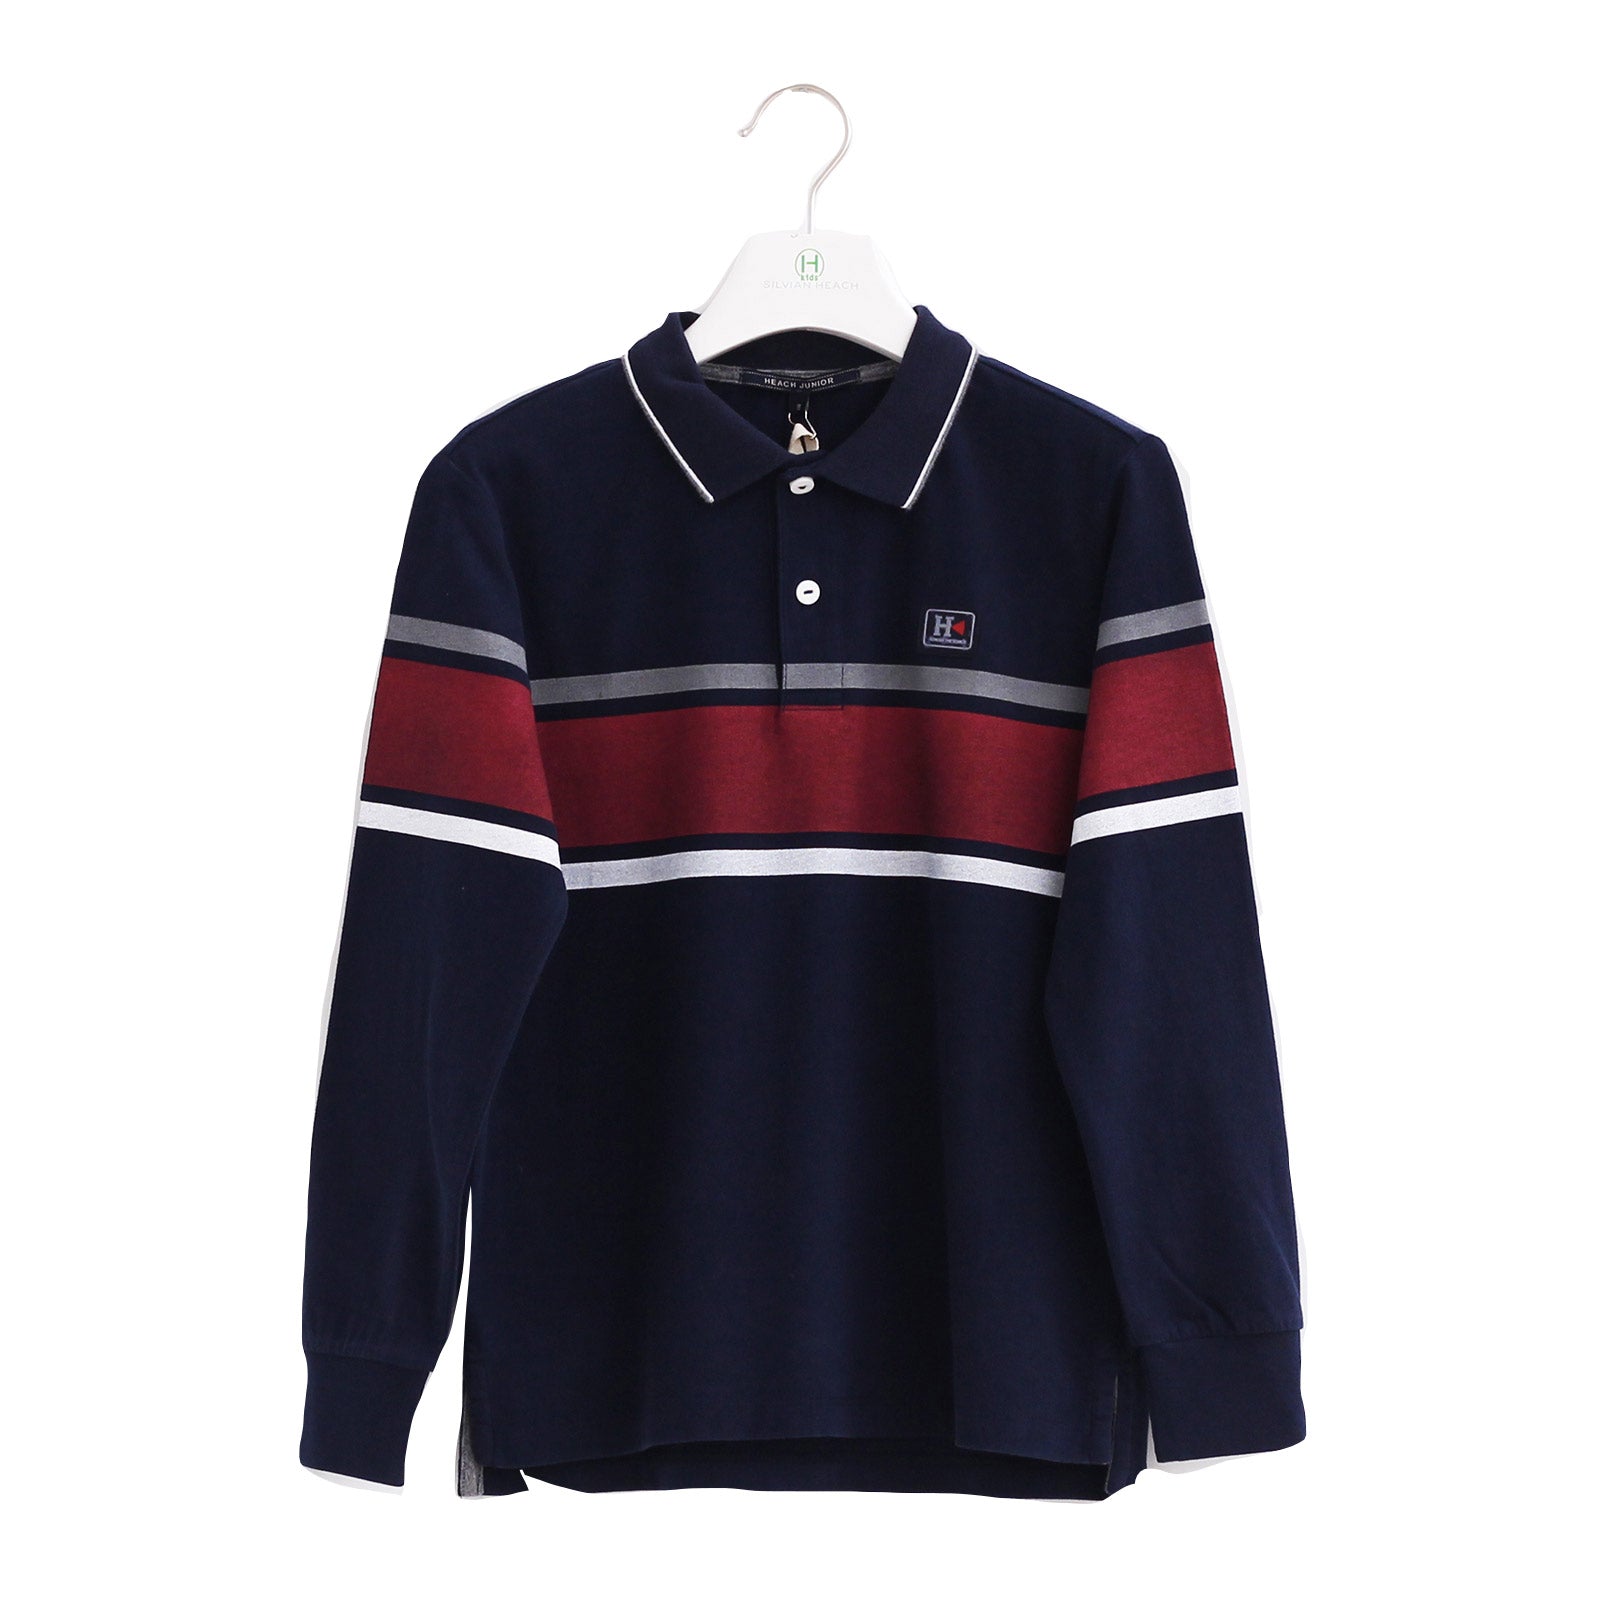 
  Polo shirt from the Silvian Heach Kids clothing line, long sleeve, striped pattern on a grey b...